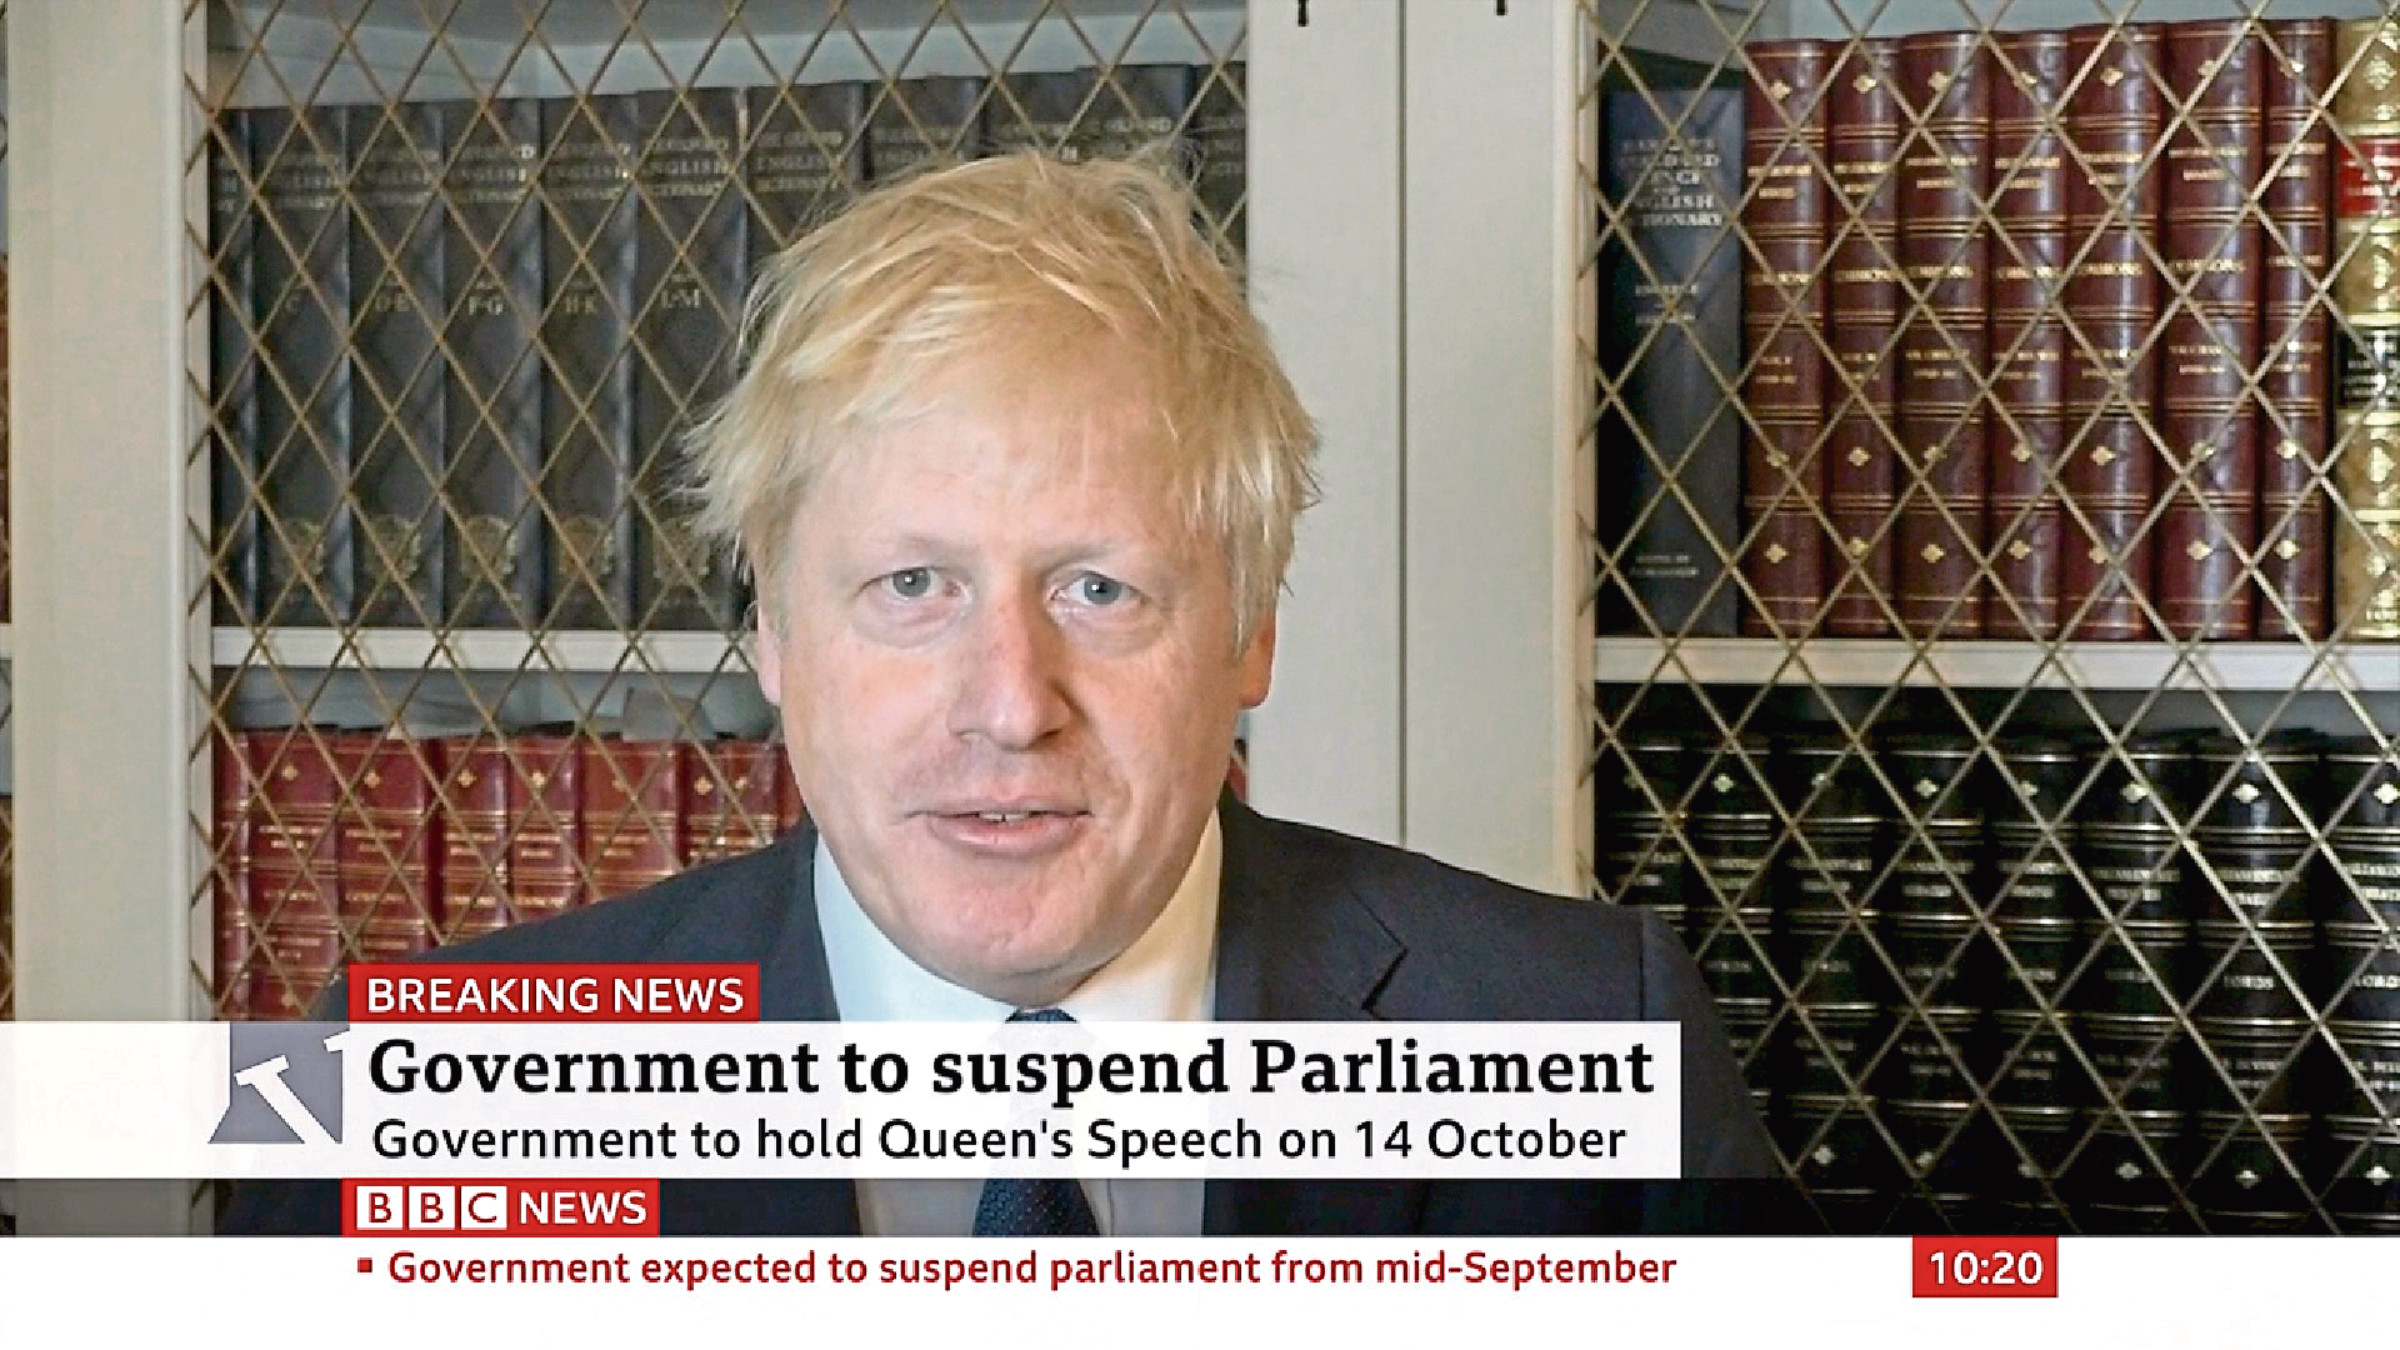 Boris Johnson asked the Queen to suspend parliament so the UK government could prepare a Queen's speech.